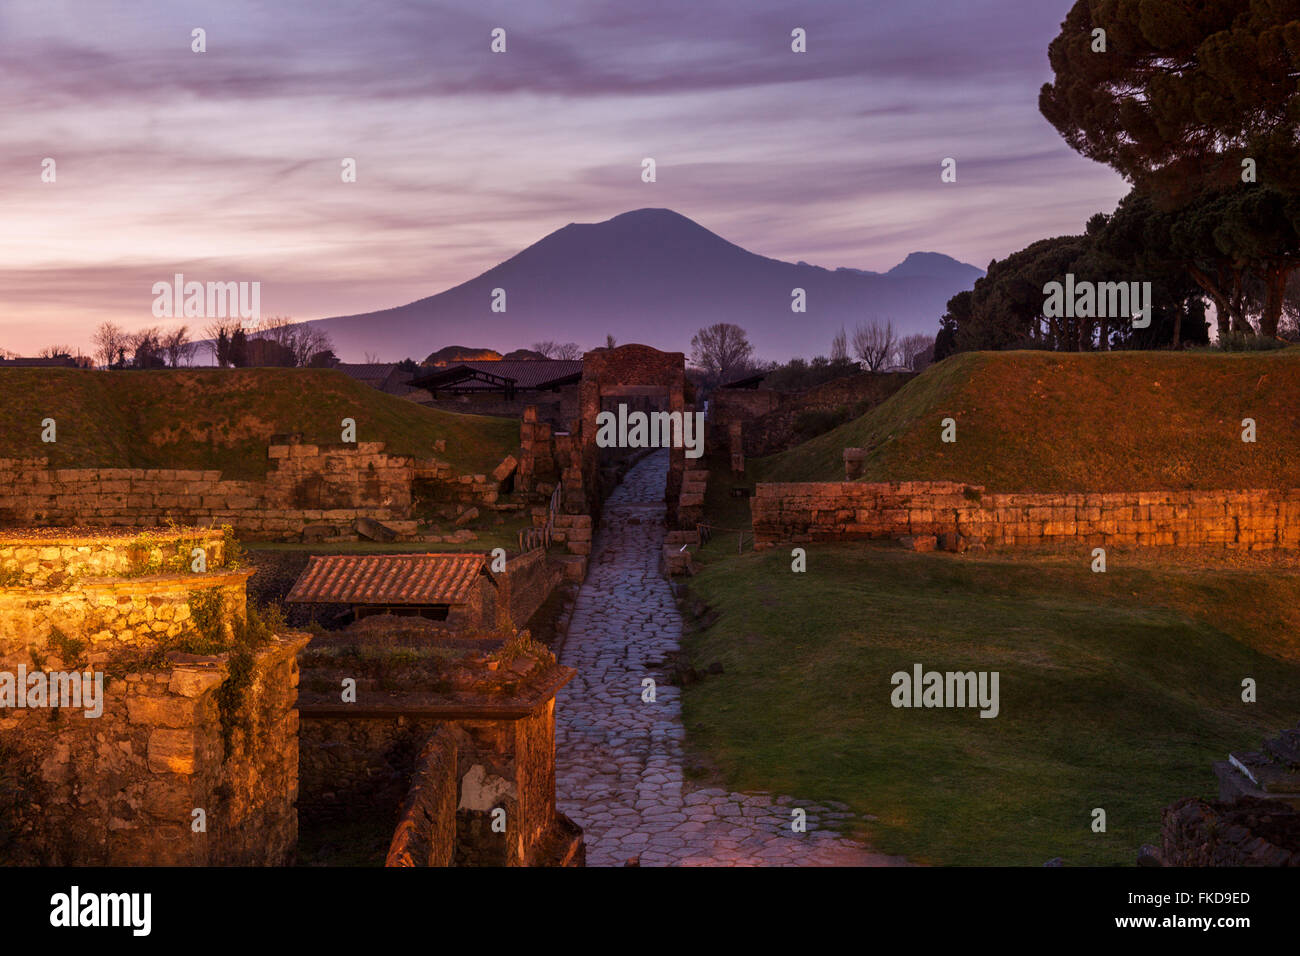 Landscape with ancient ruins and Mount Vesuvius in background Stock Photo